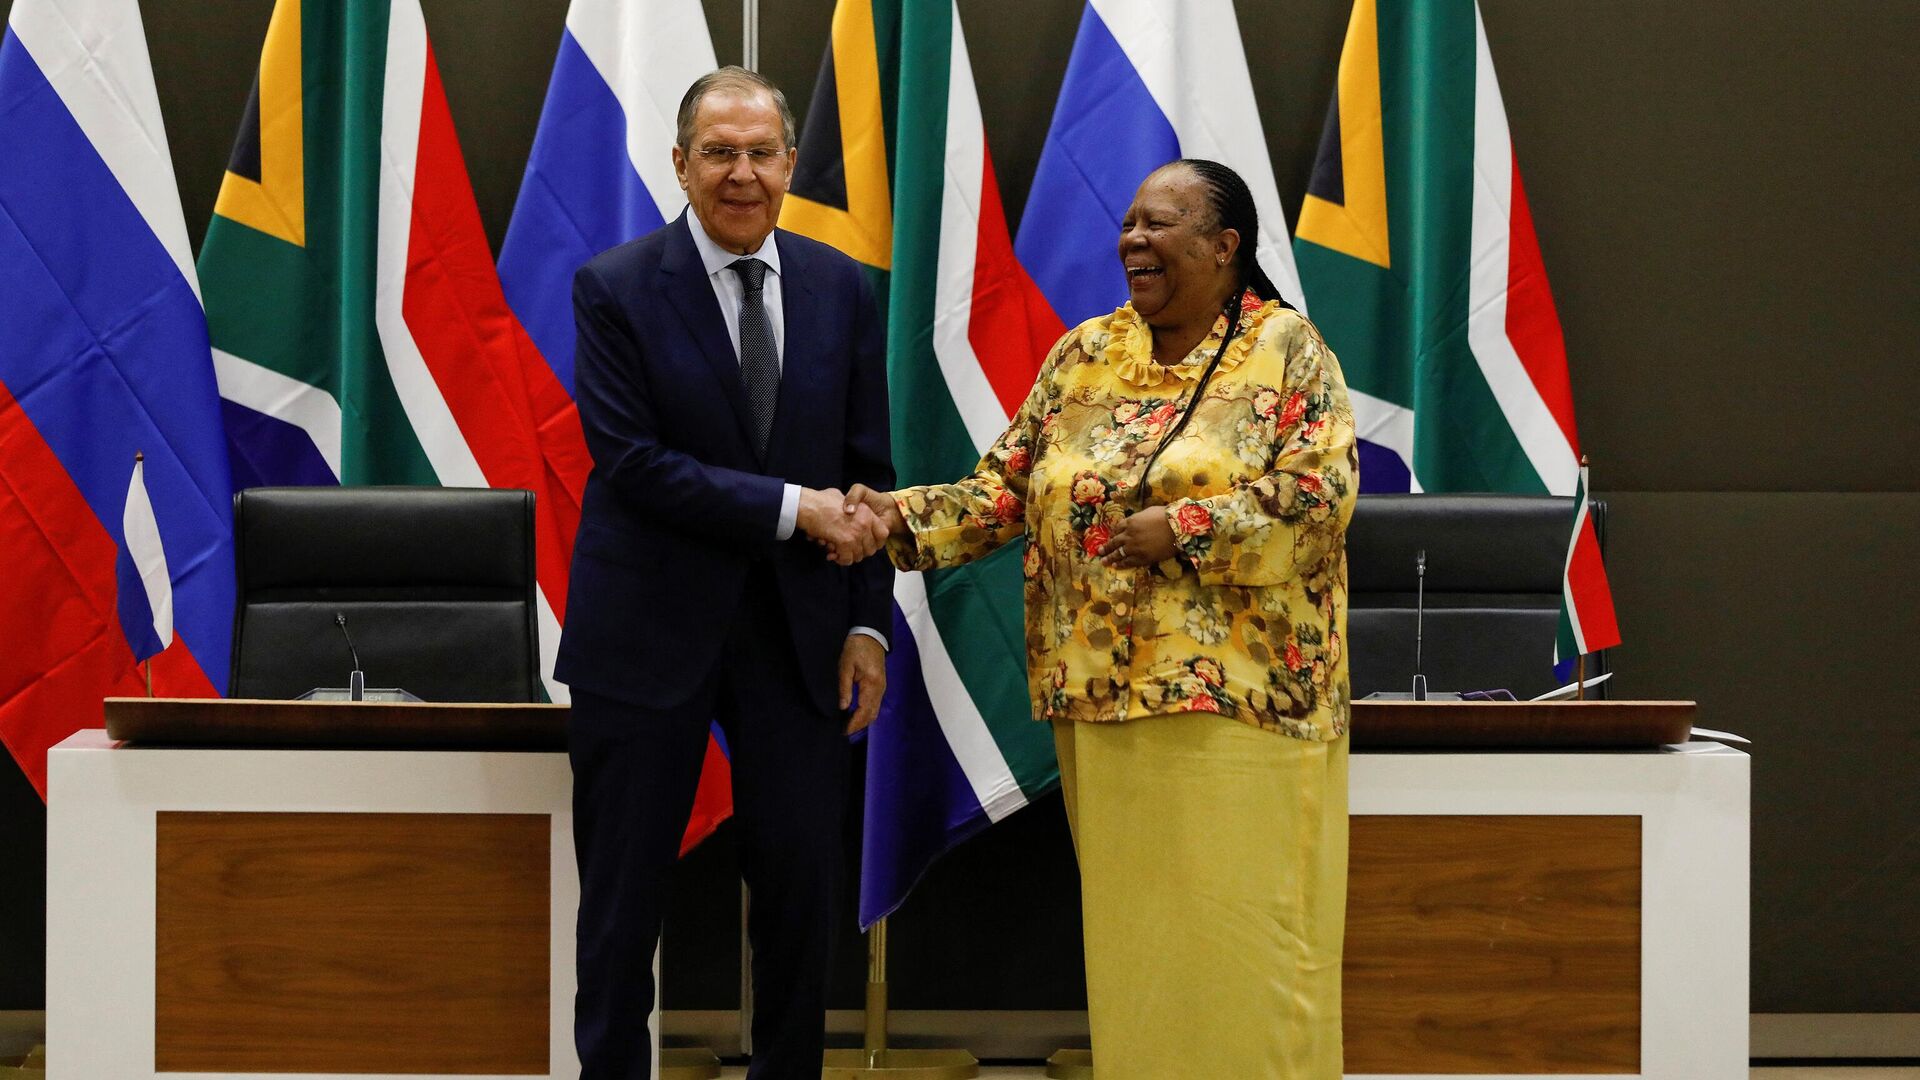 Russian Minister of Foreign Affairs of Sergei Lavrov (L) shakes hands with South African Minister of International Relations and Cooperation Naledi Pandor (R) during a press conference following their meeting at the OR Tambo Building in Pretoria on January 23, 2023.  - Sputnik International, 1920, 30.03.2023